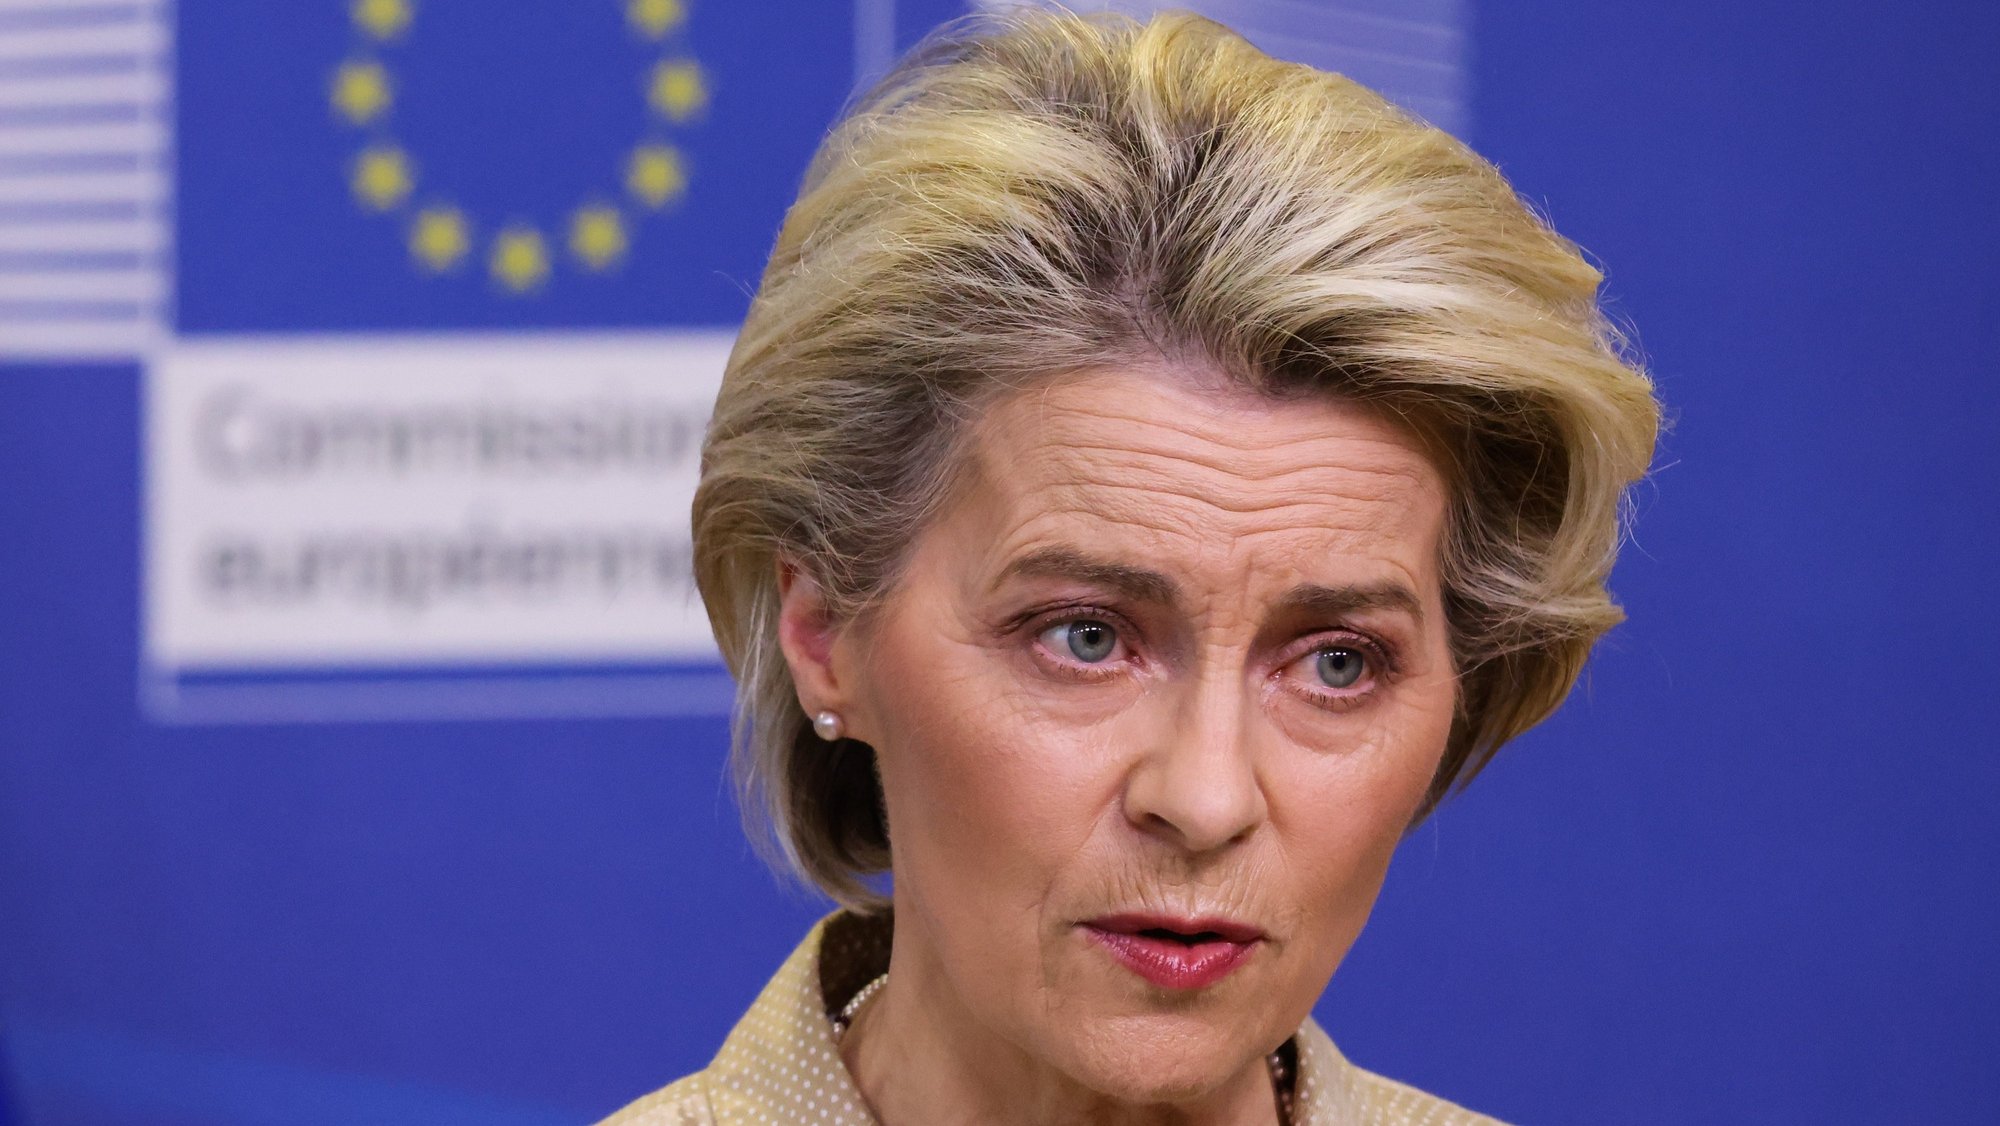 epa09801639 European Commission President Ursula von der Leyen speaks as she greets the US Secretary of State before a meeting, amid the Russian invasion of Ukraine, in Brussels, Belgium, 04 March 2022. EPA/YVES HERMAN / POOL